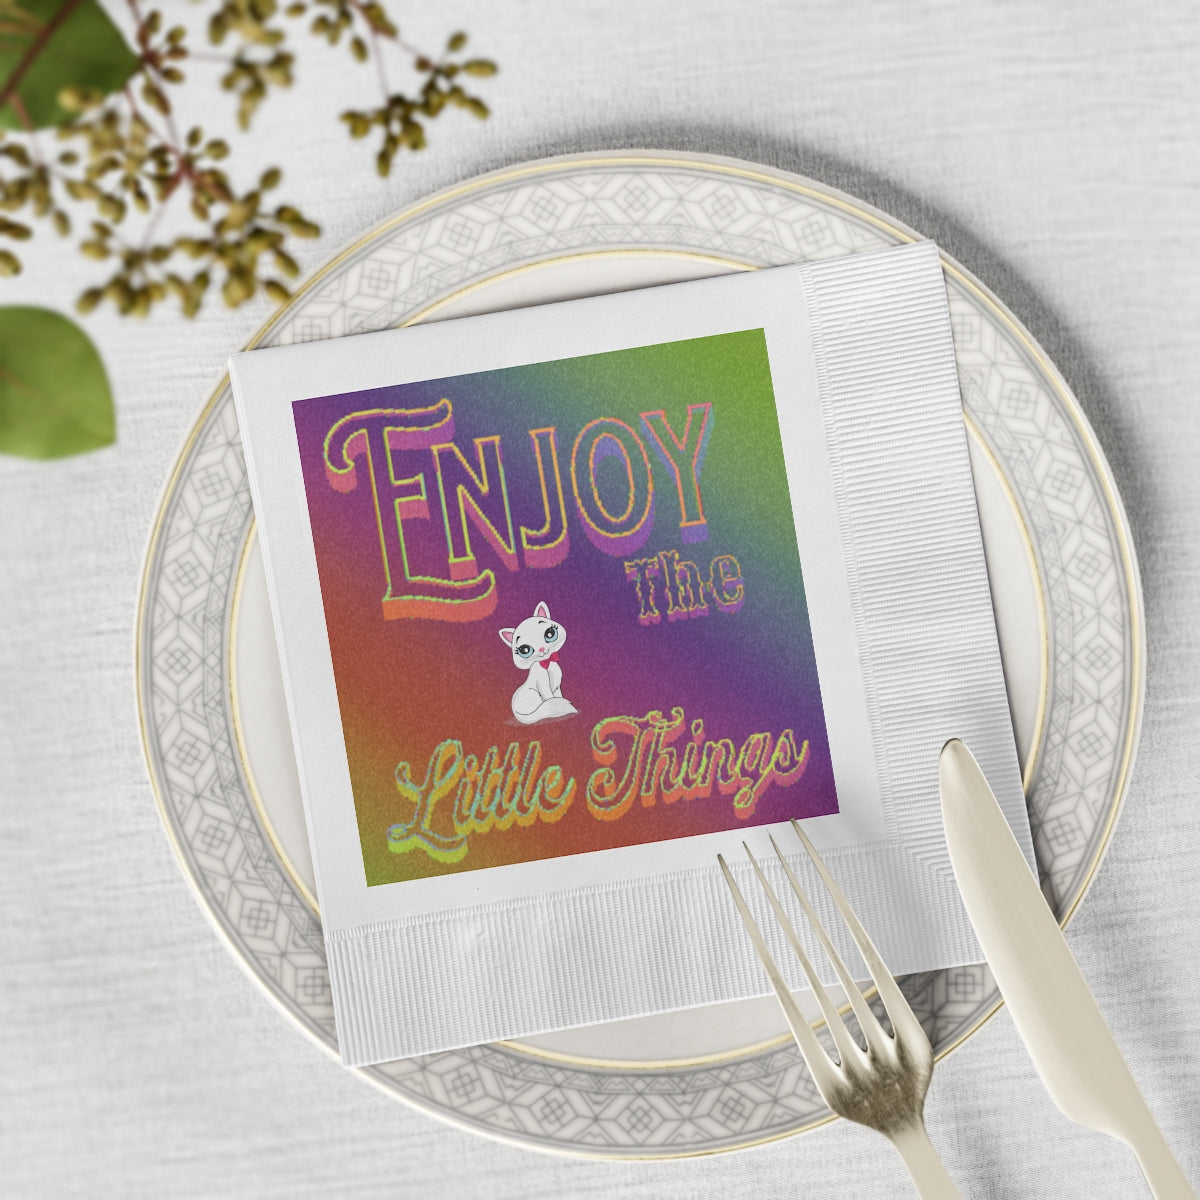 Enjoy the Little Things - White Coined Napkins